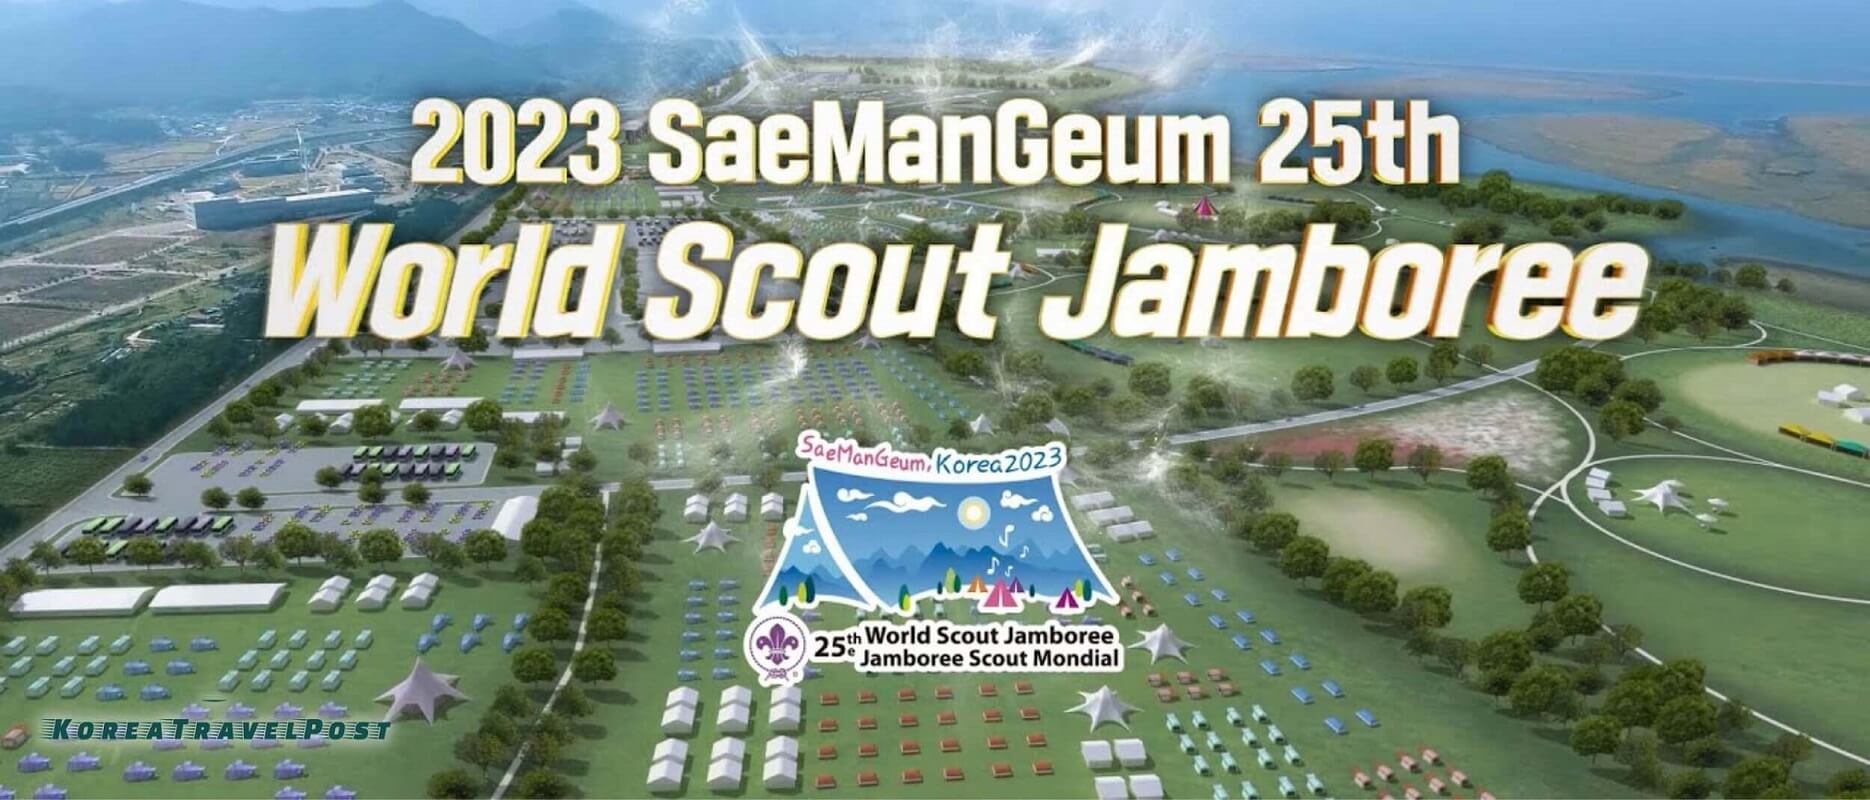 South Korea Hosts the 25th World Scout Jamboree Featuring Popular KPOP